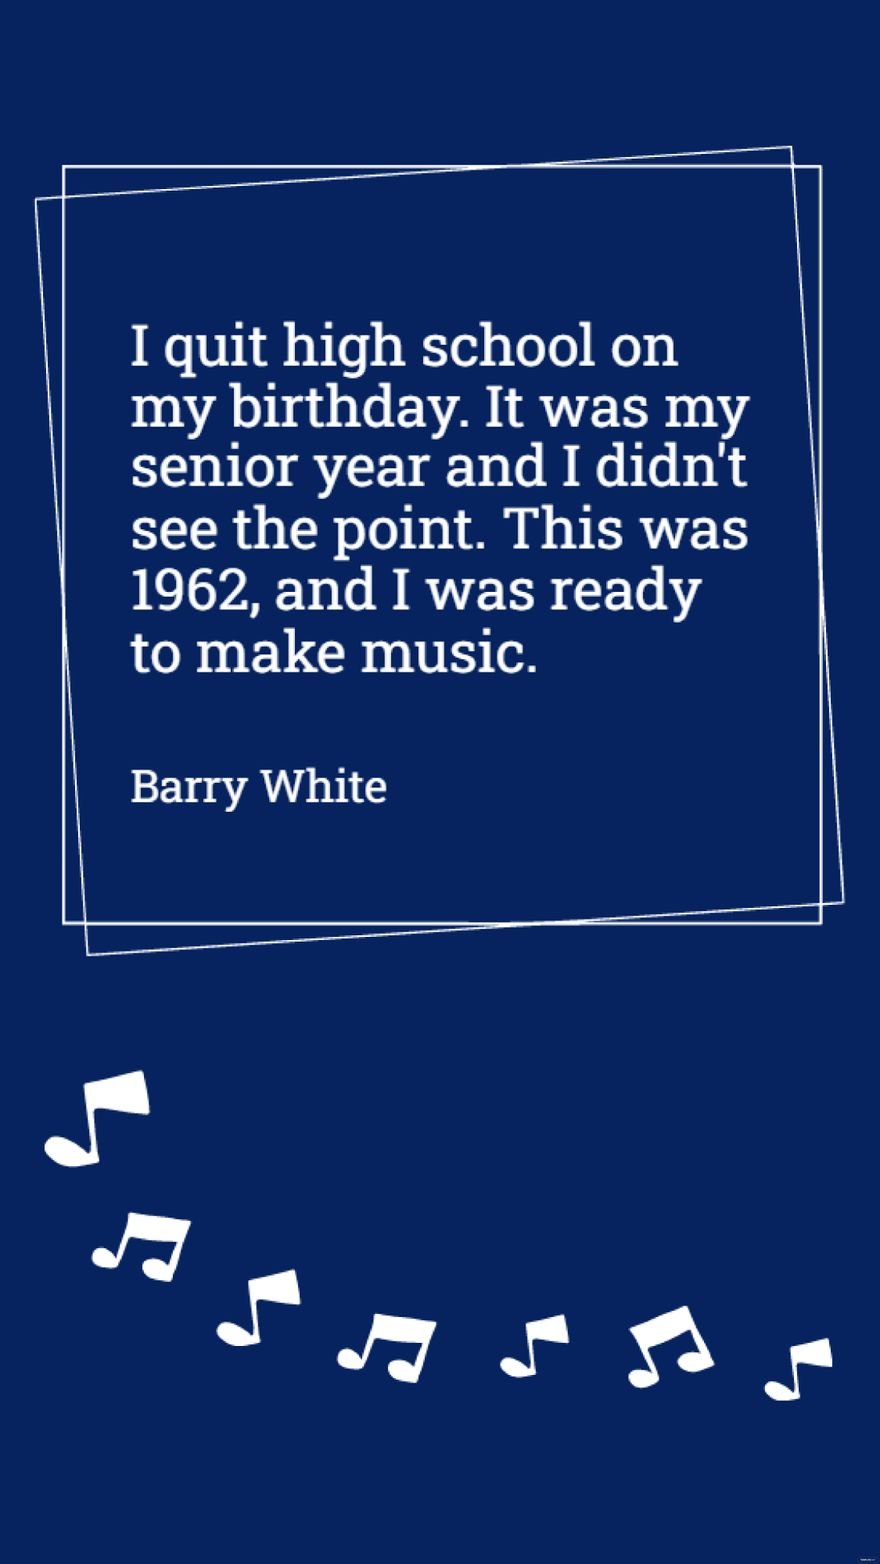 Barry White - I quit high school on my birthday. It was my senior year and I didn't see the point. This was 1962, and I was ready to make music. in JPG